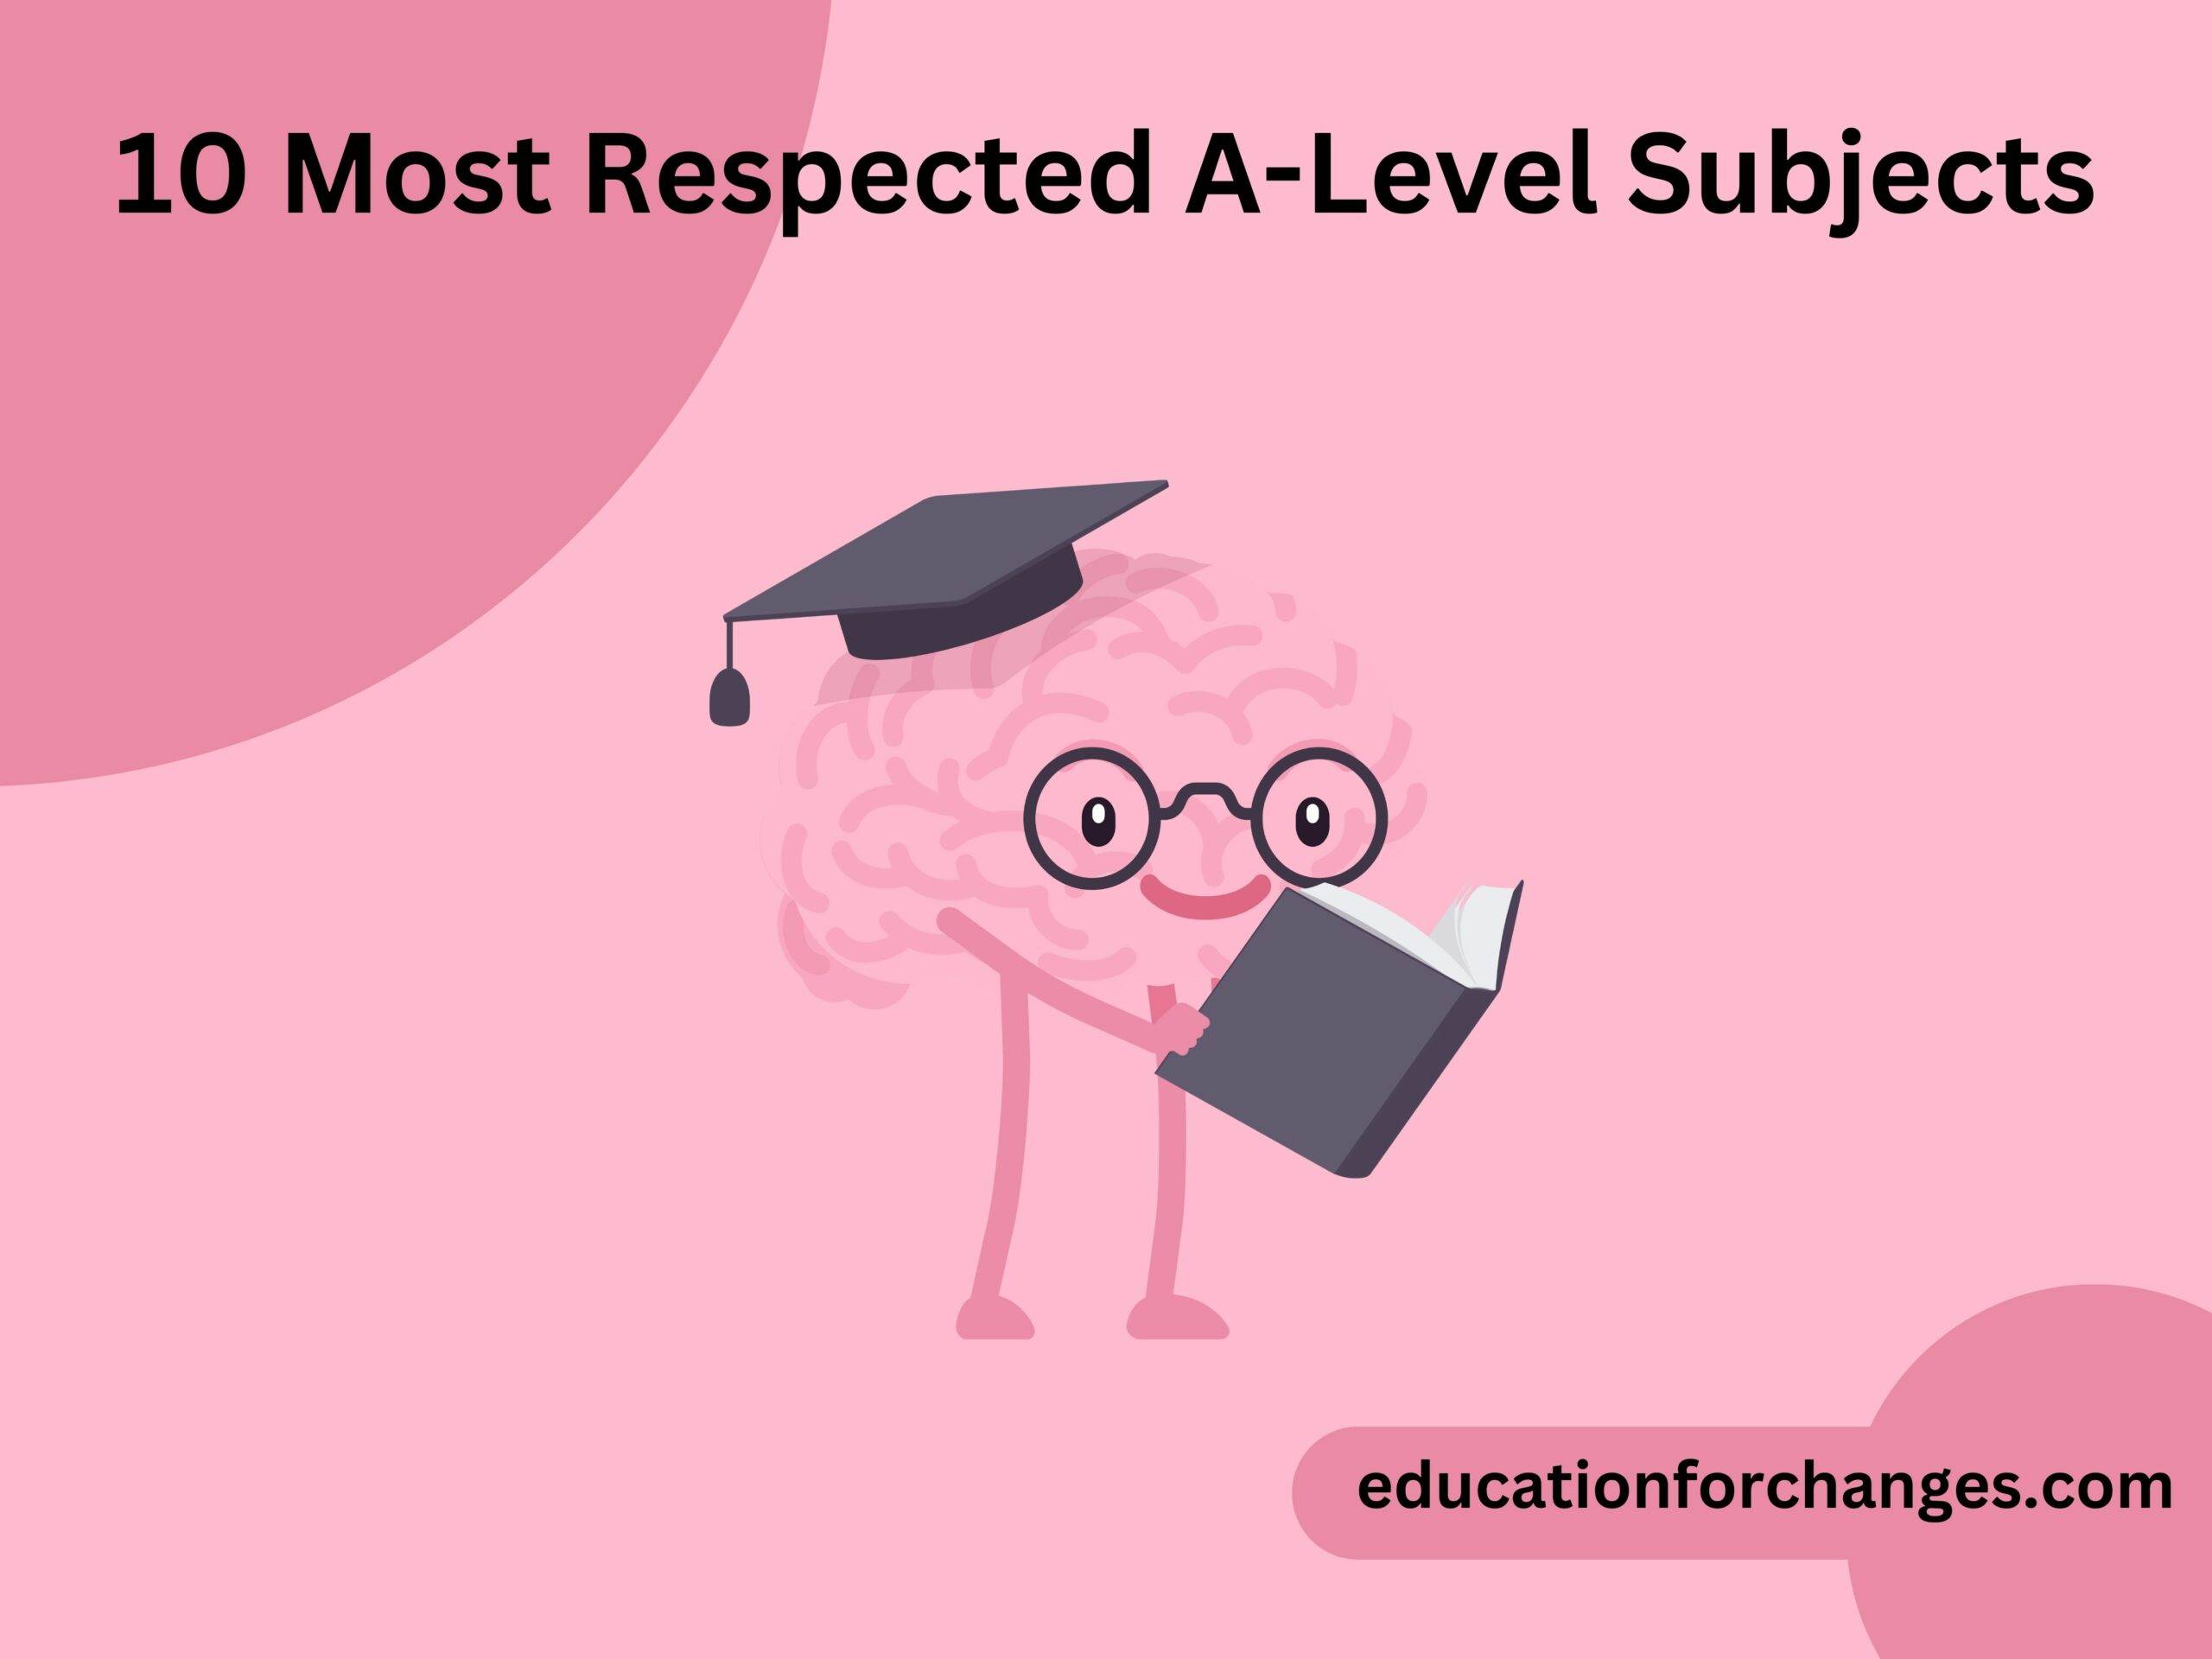 10 Most Respected A-Level Subjects